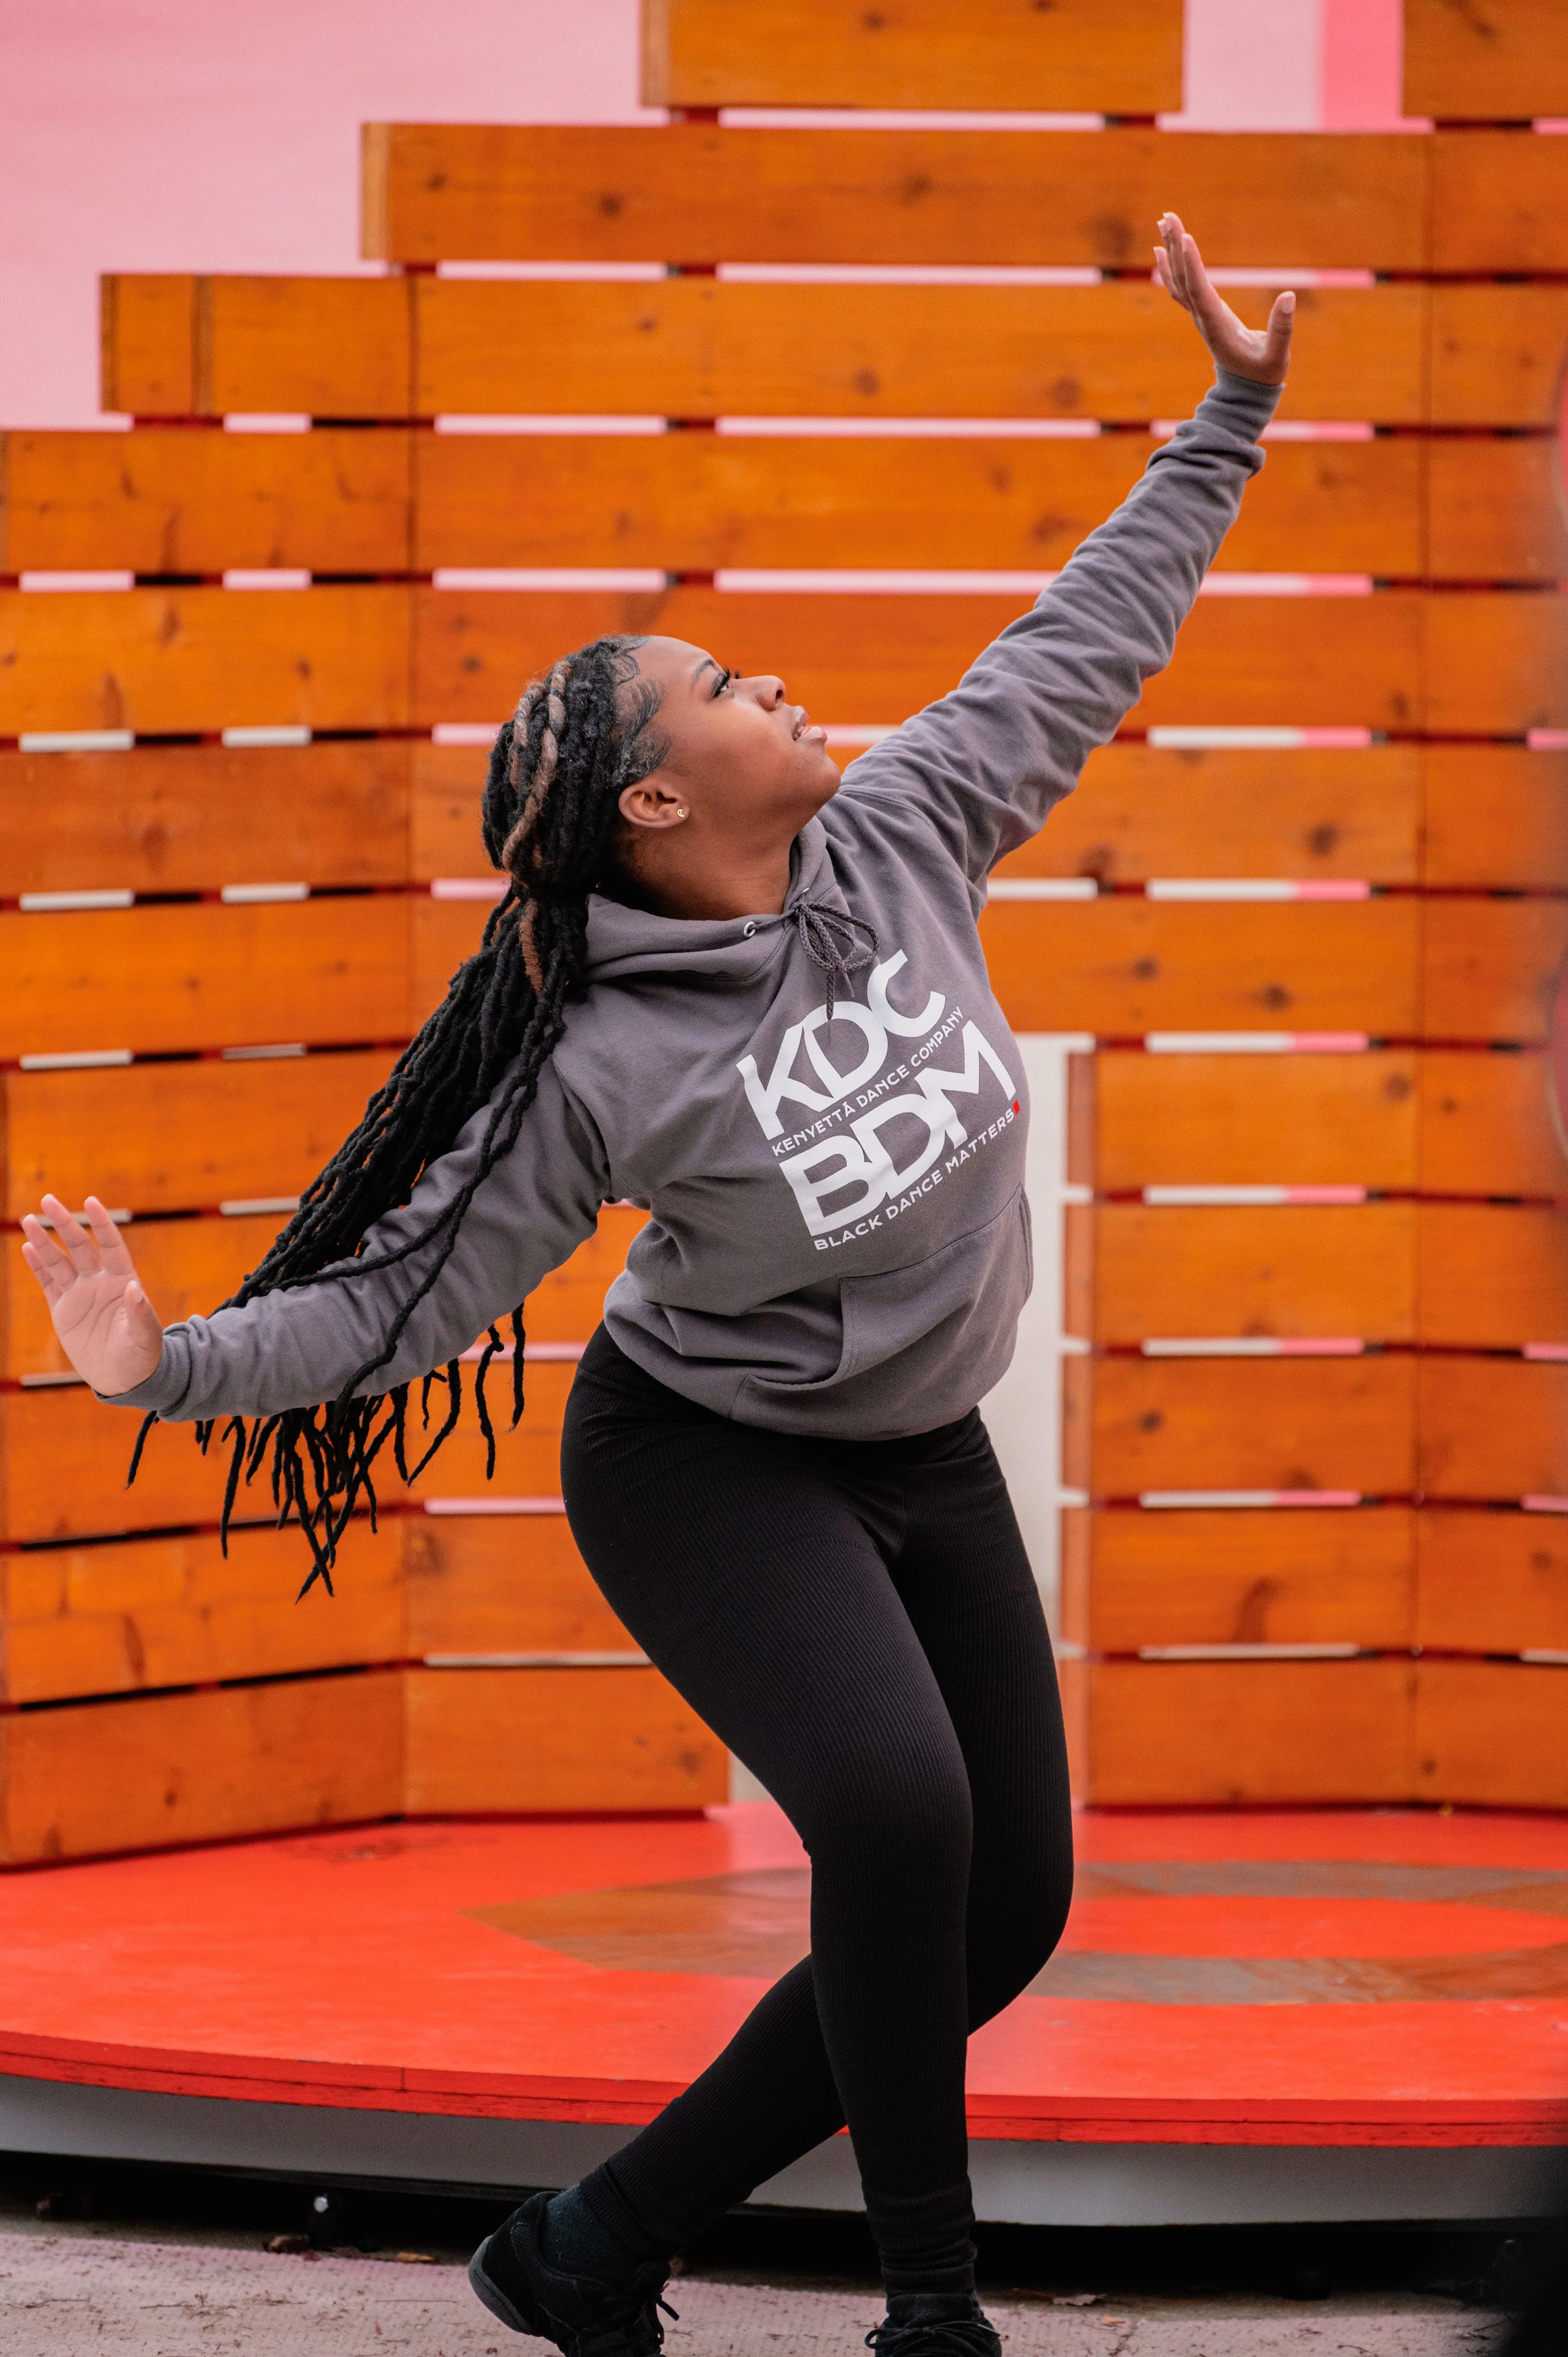 Woman with braids wearing casual clothes dancing and reaching upwards in front of an orange pallet wall.